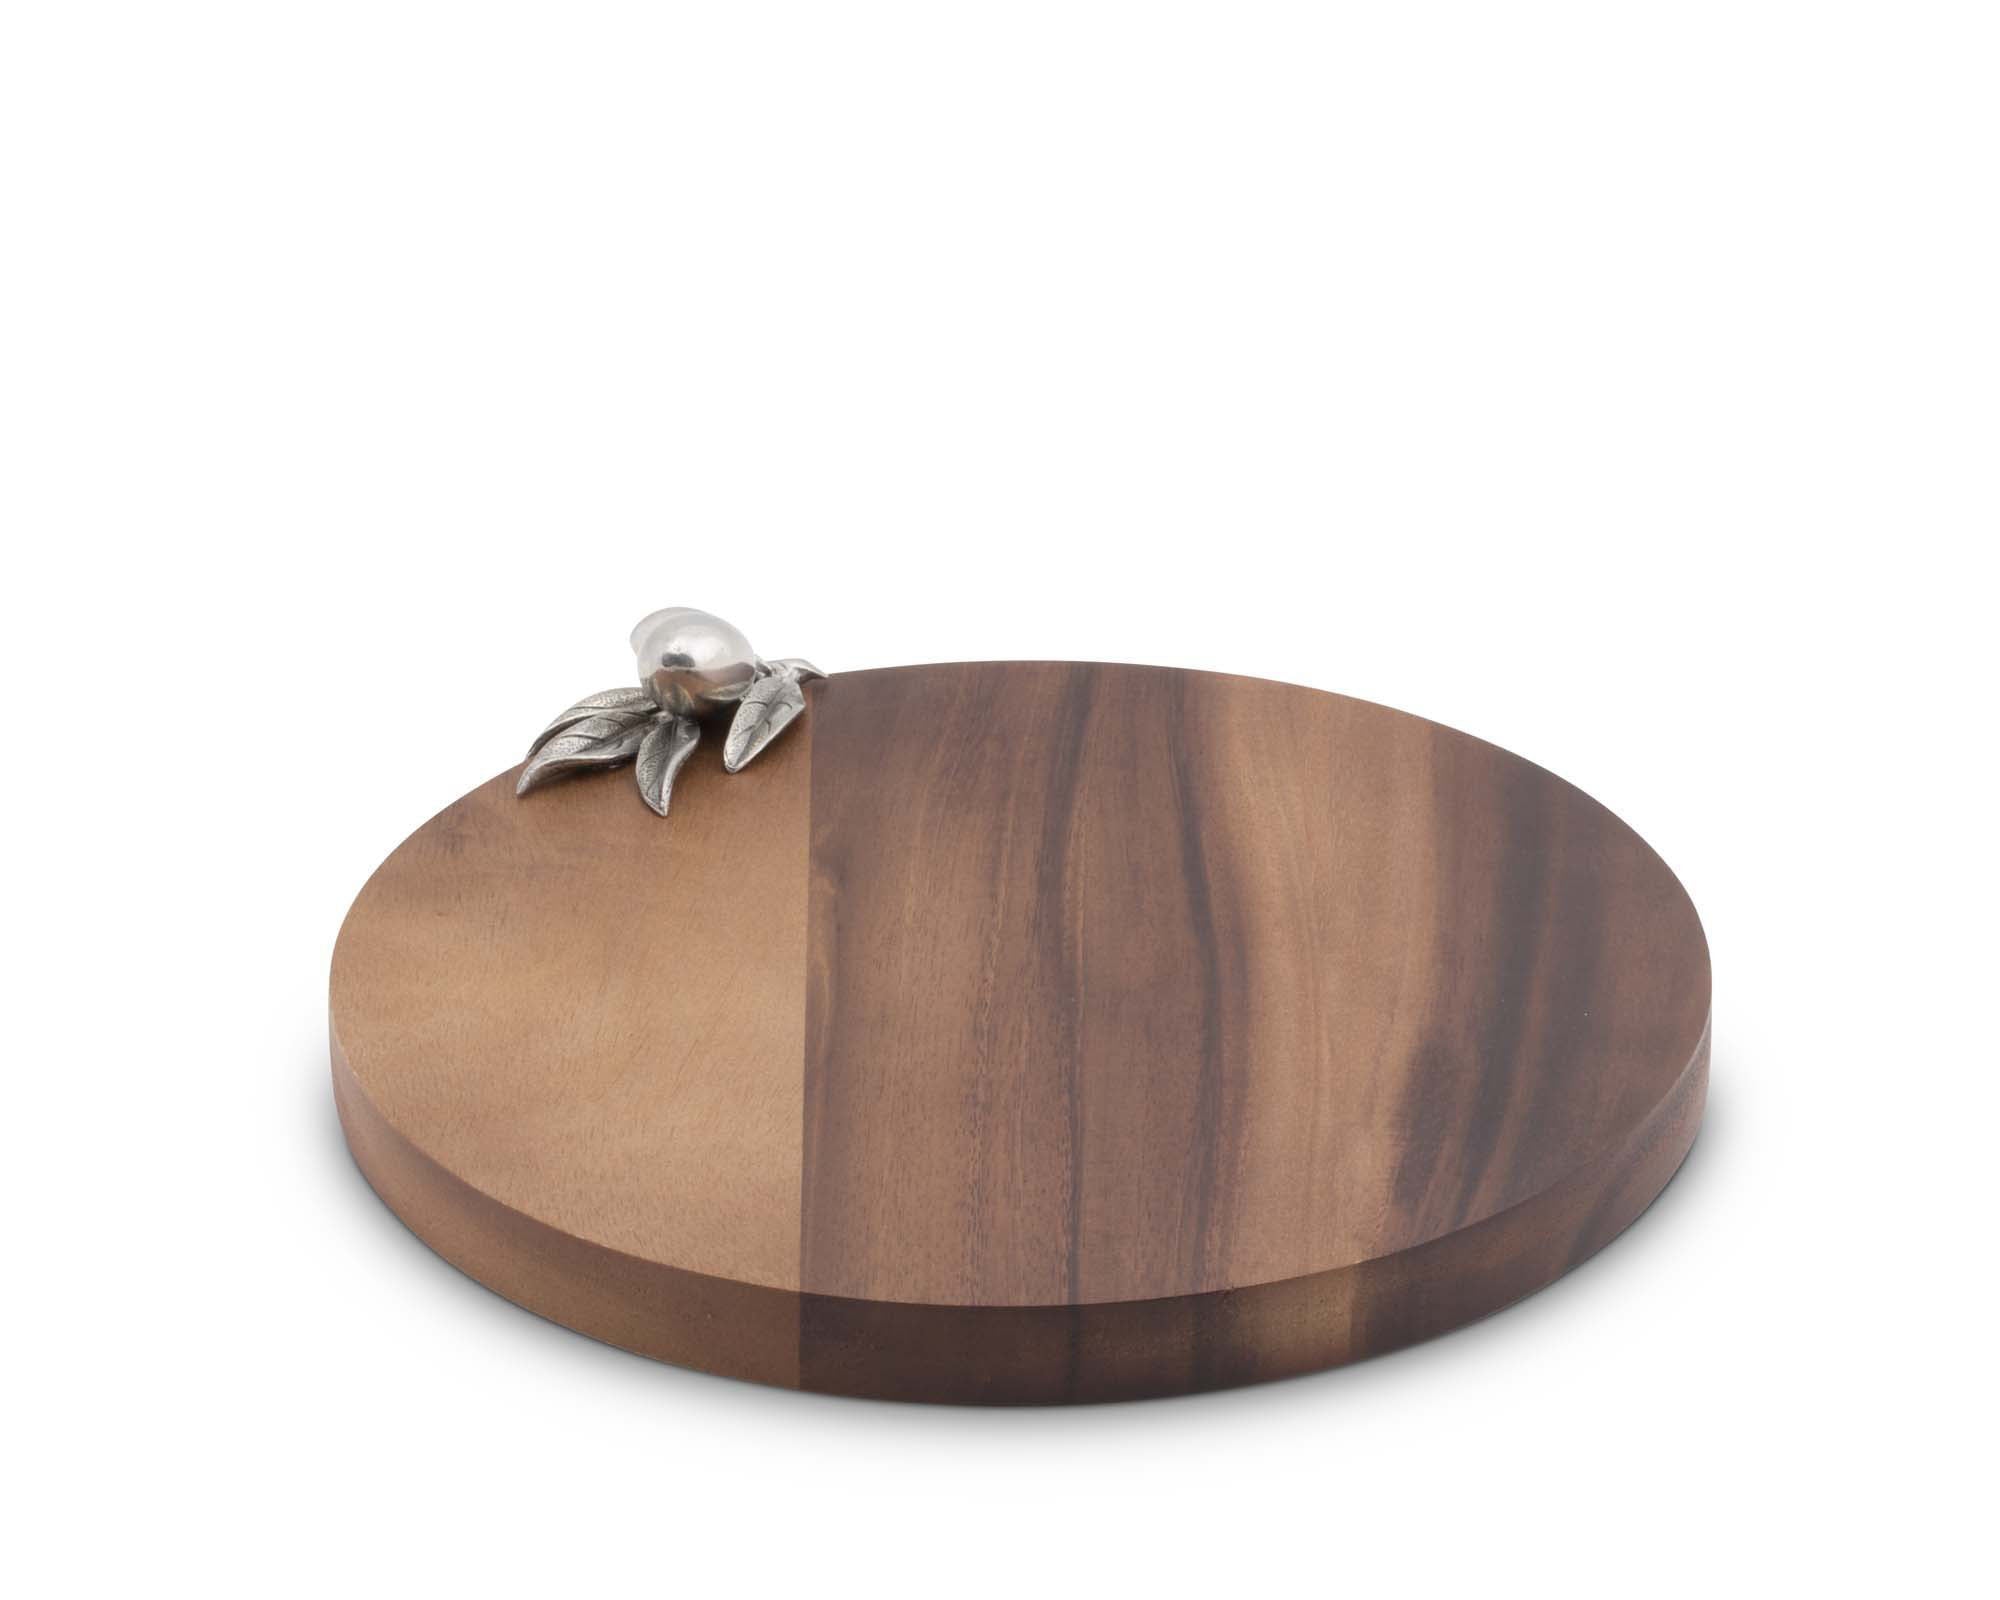 Vagabond House Olive Cheese Board Product Image